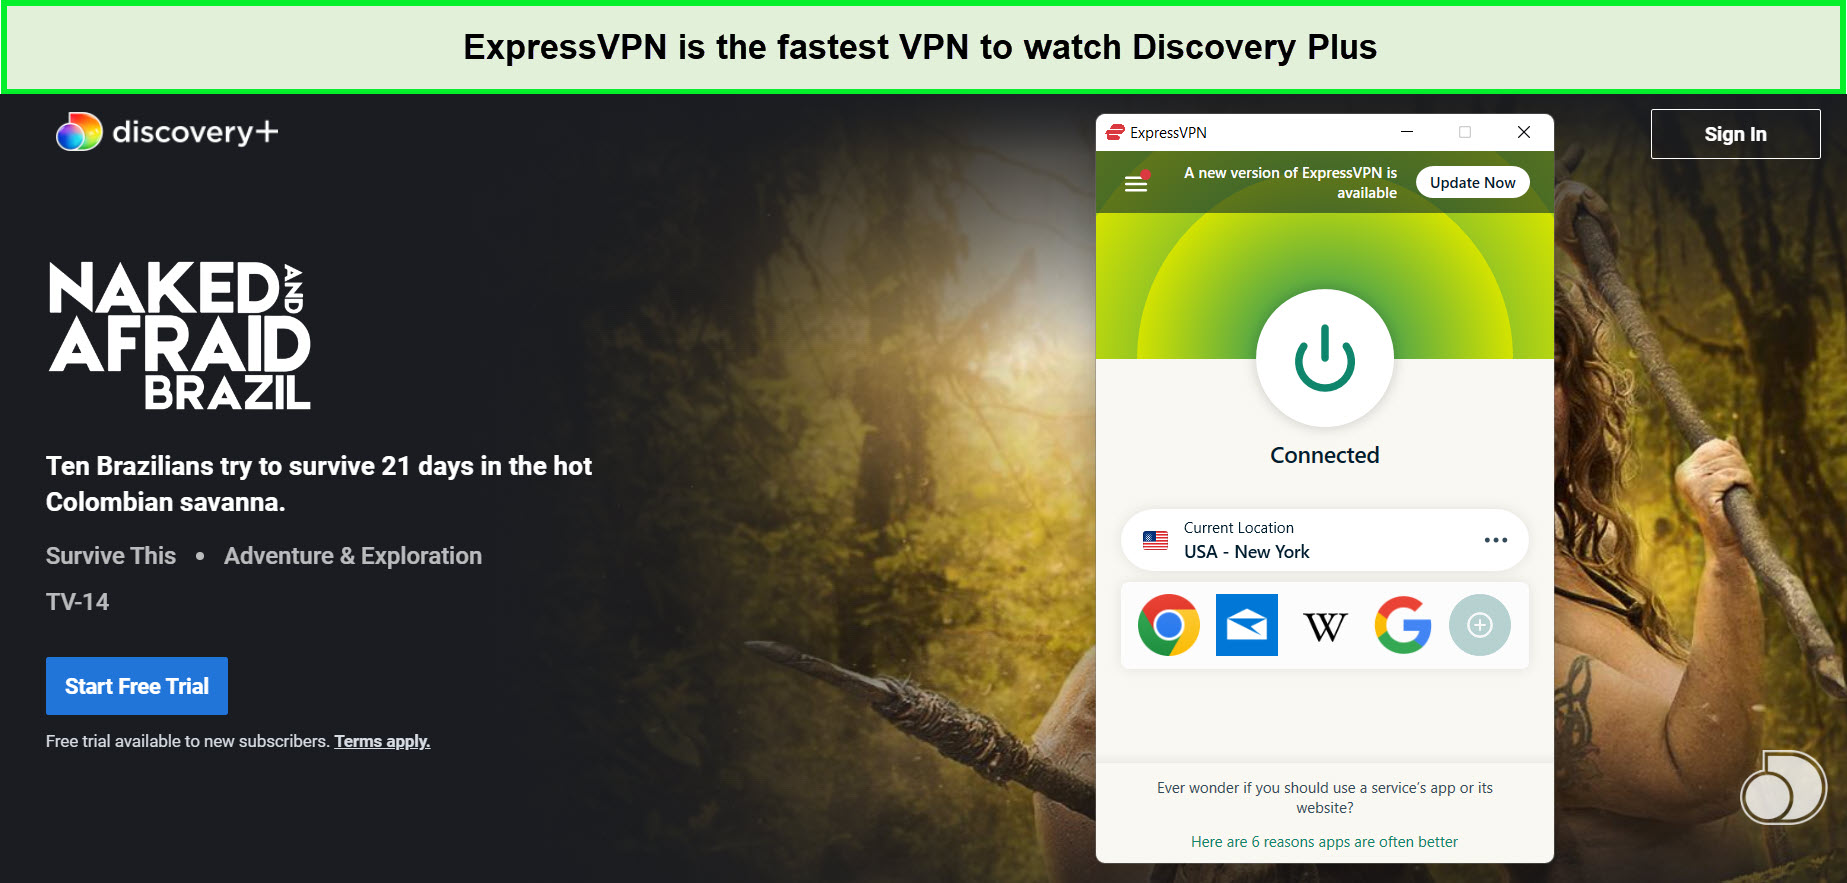 expressvpn-is-the-best-vpn-to-watch-naked-and-afraid-brazil-season-16-on-discovery-plus-in-Spain